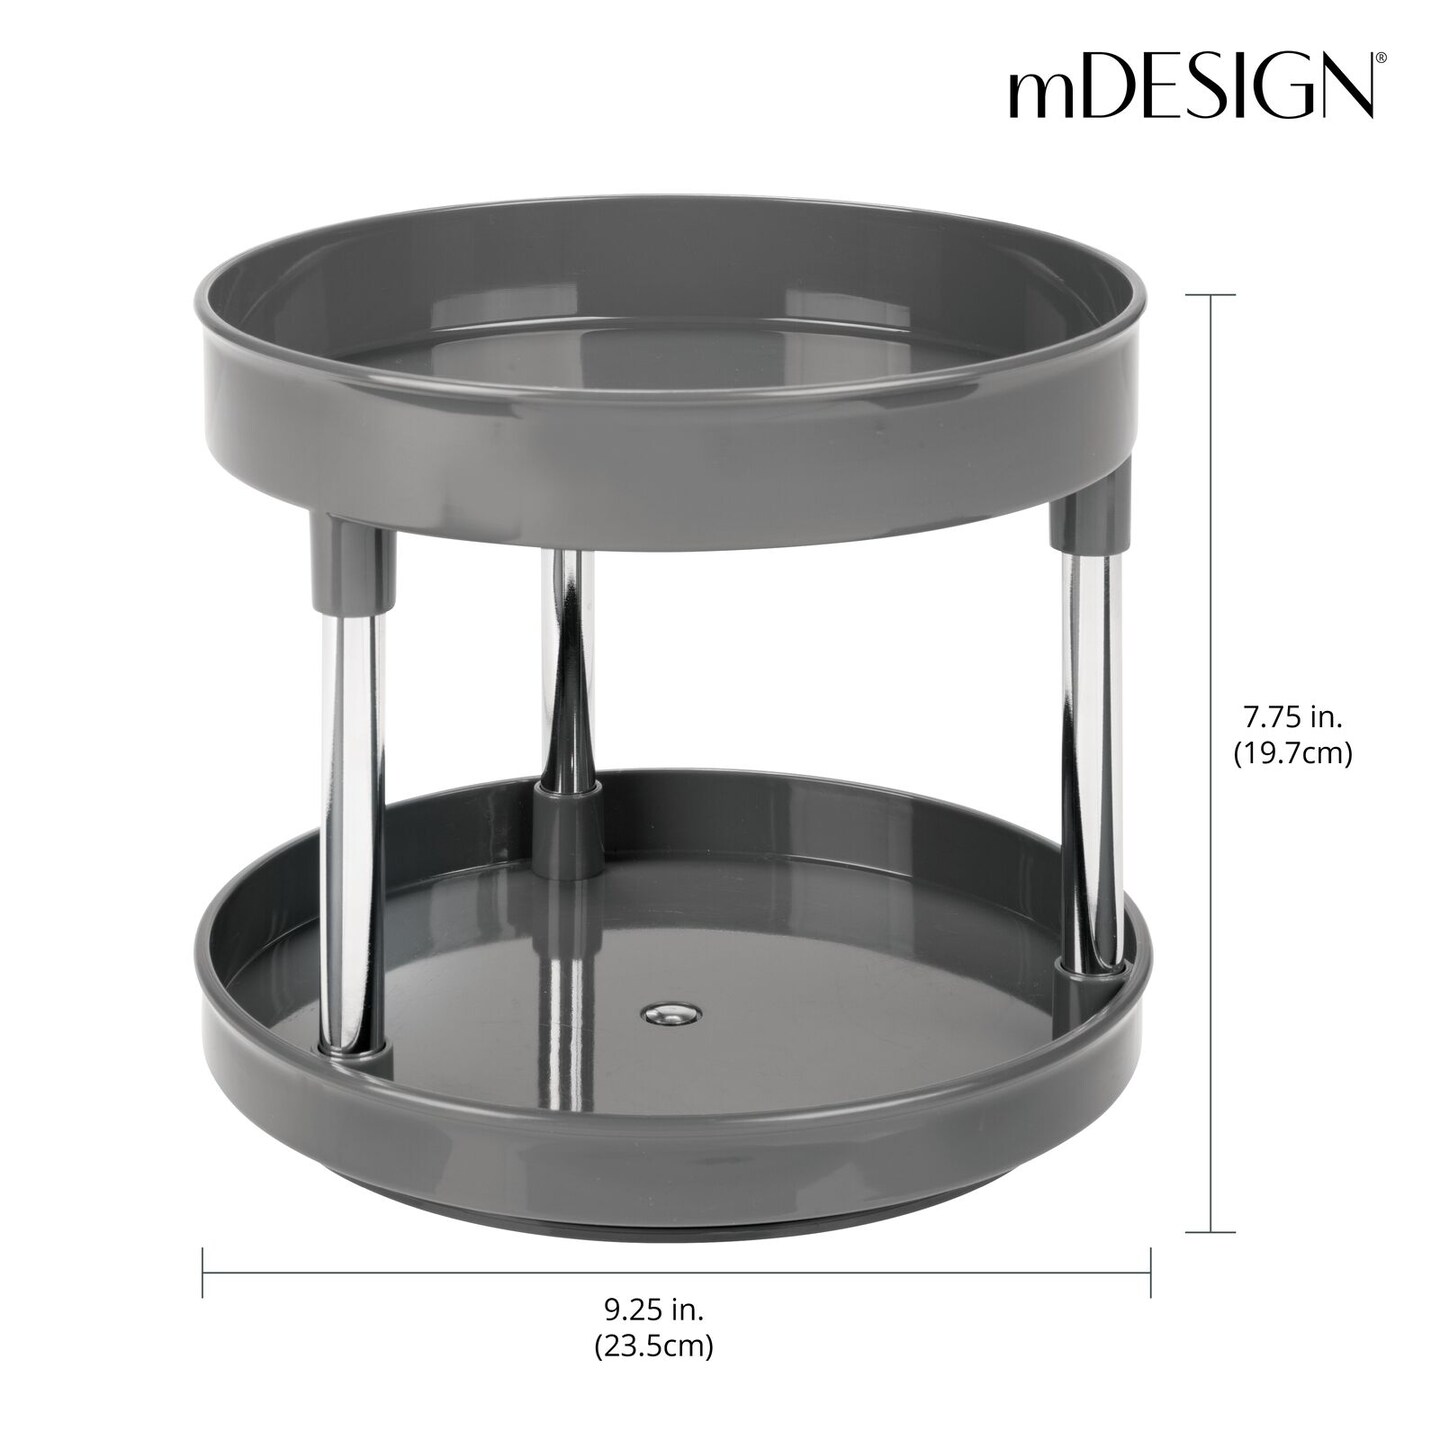 mDesign 2-Tier Lazy Susan for Bathroom Cabinets